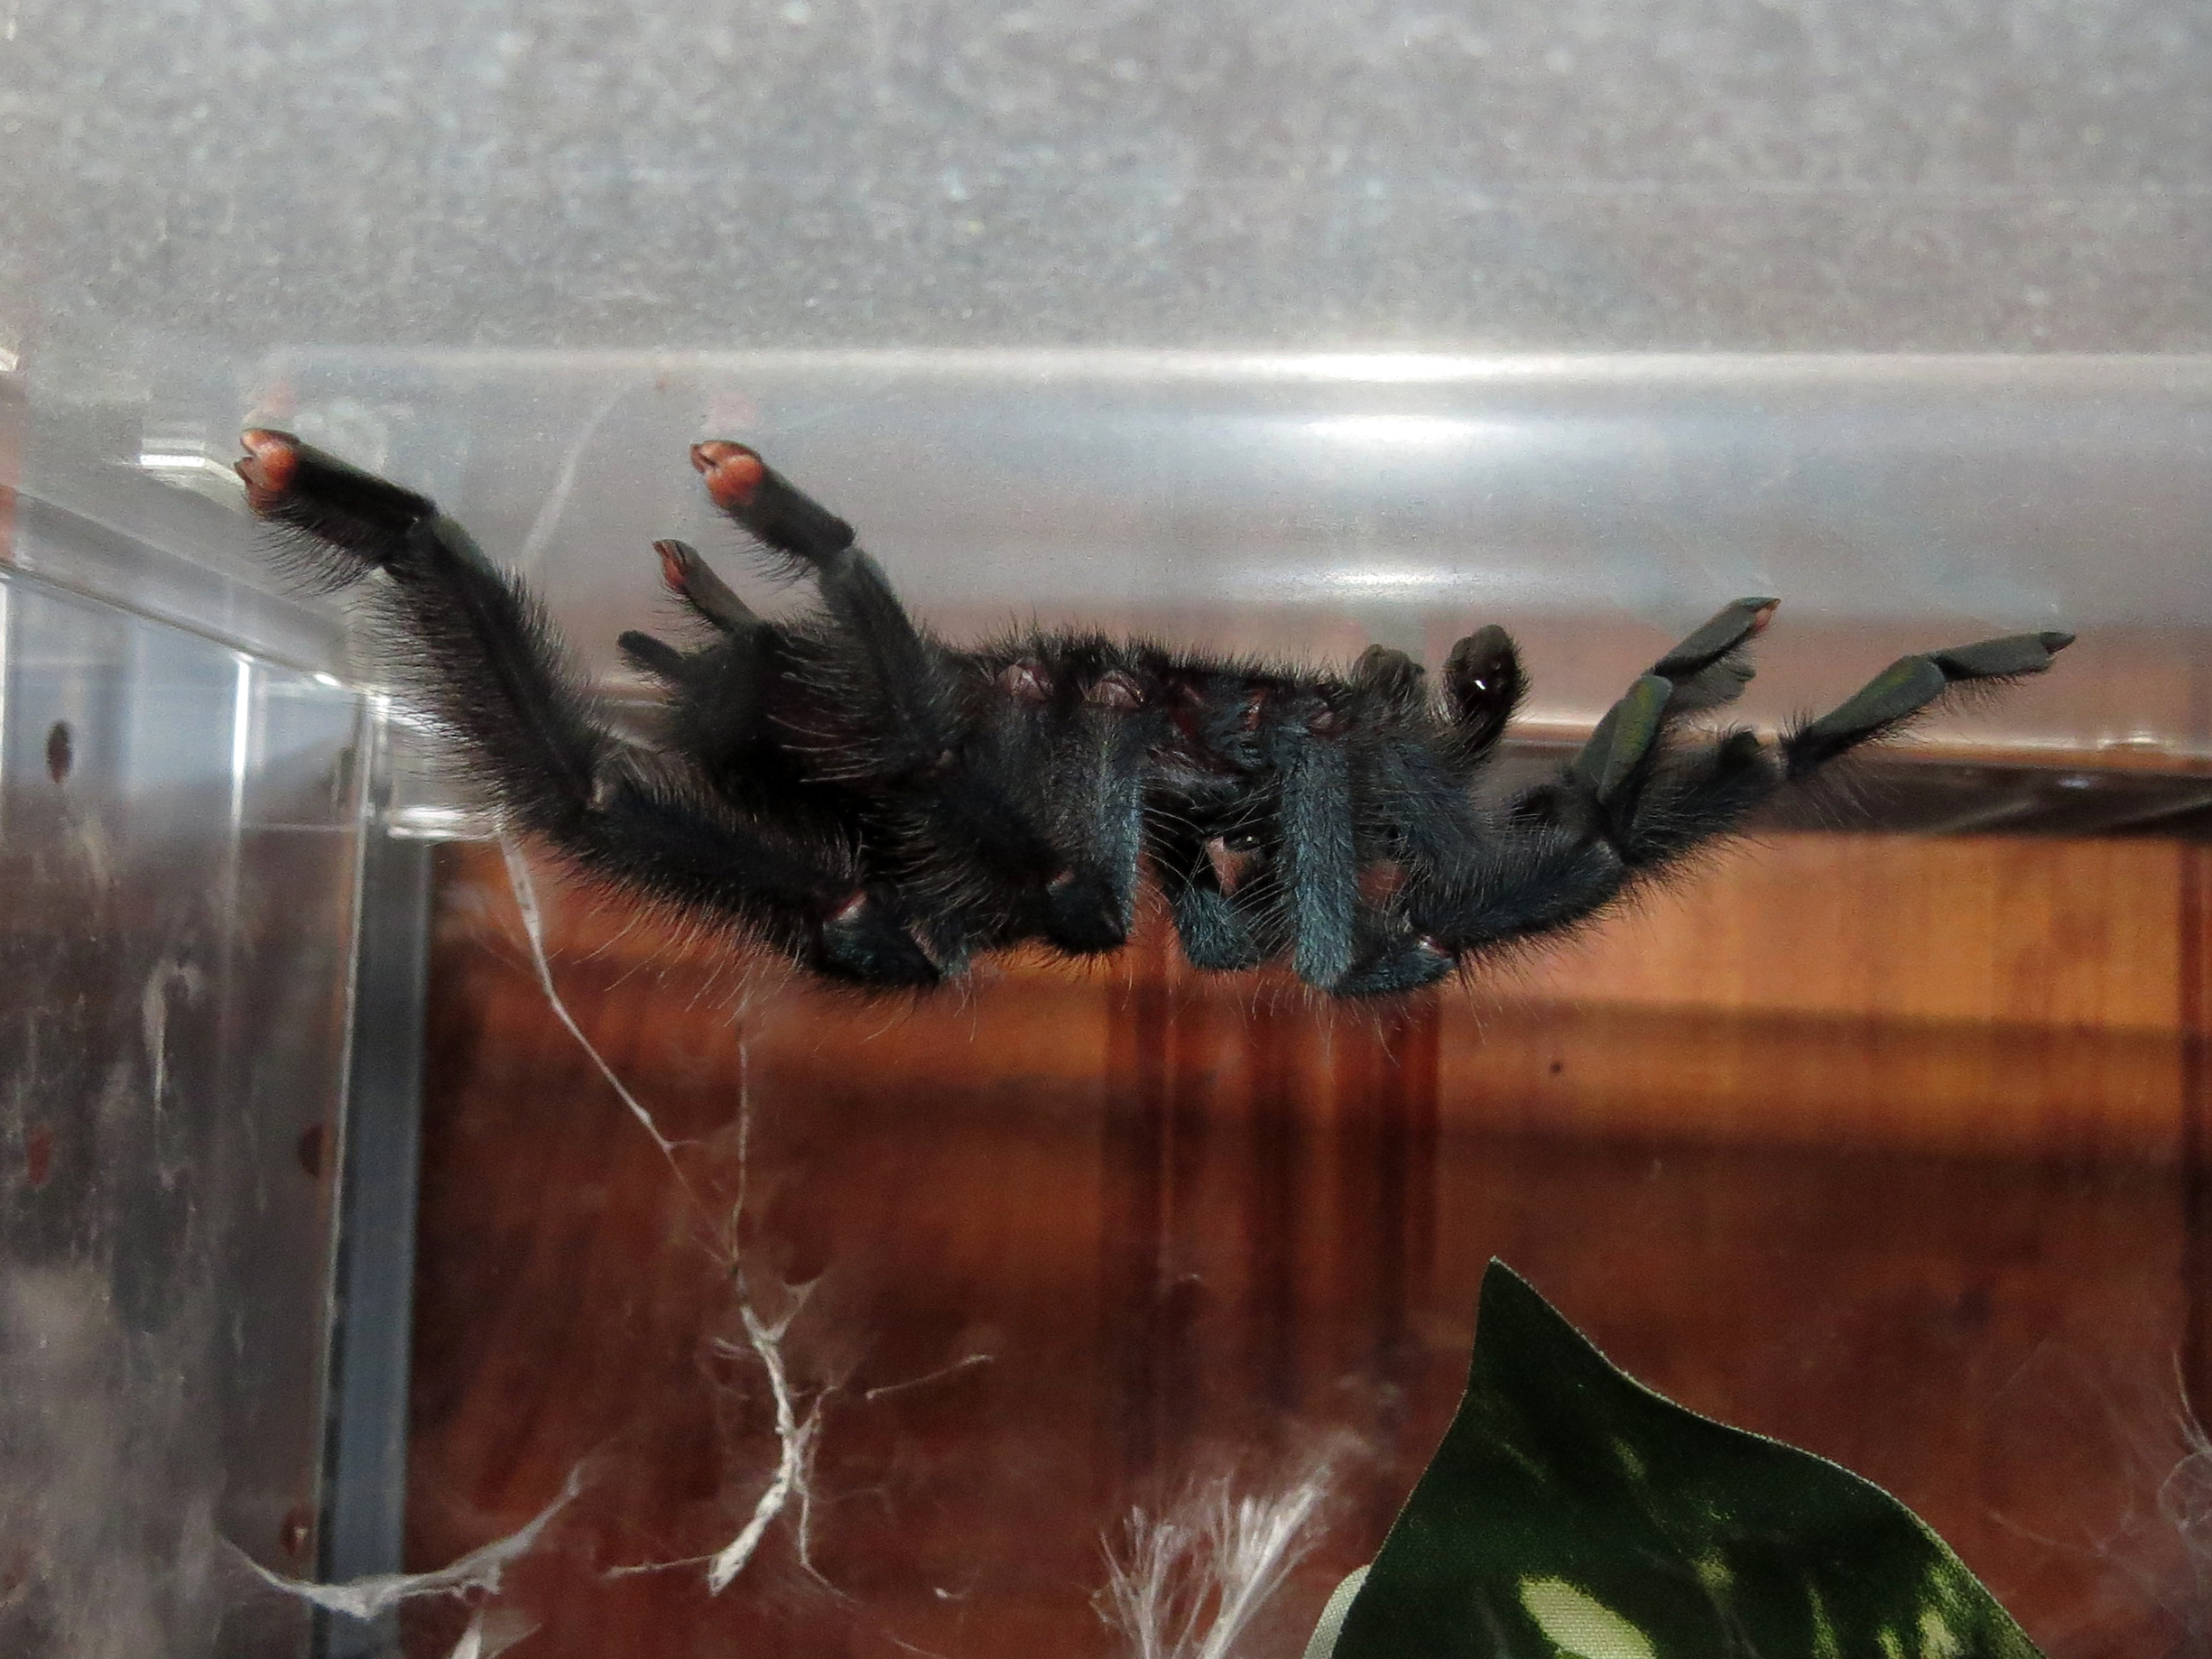 All Hooked Out (♂ Avicularia avicularia 4″) [1/2]